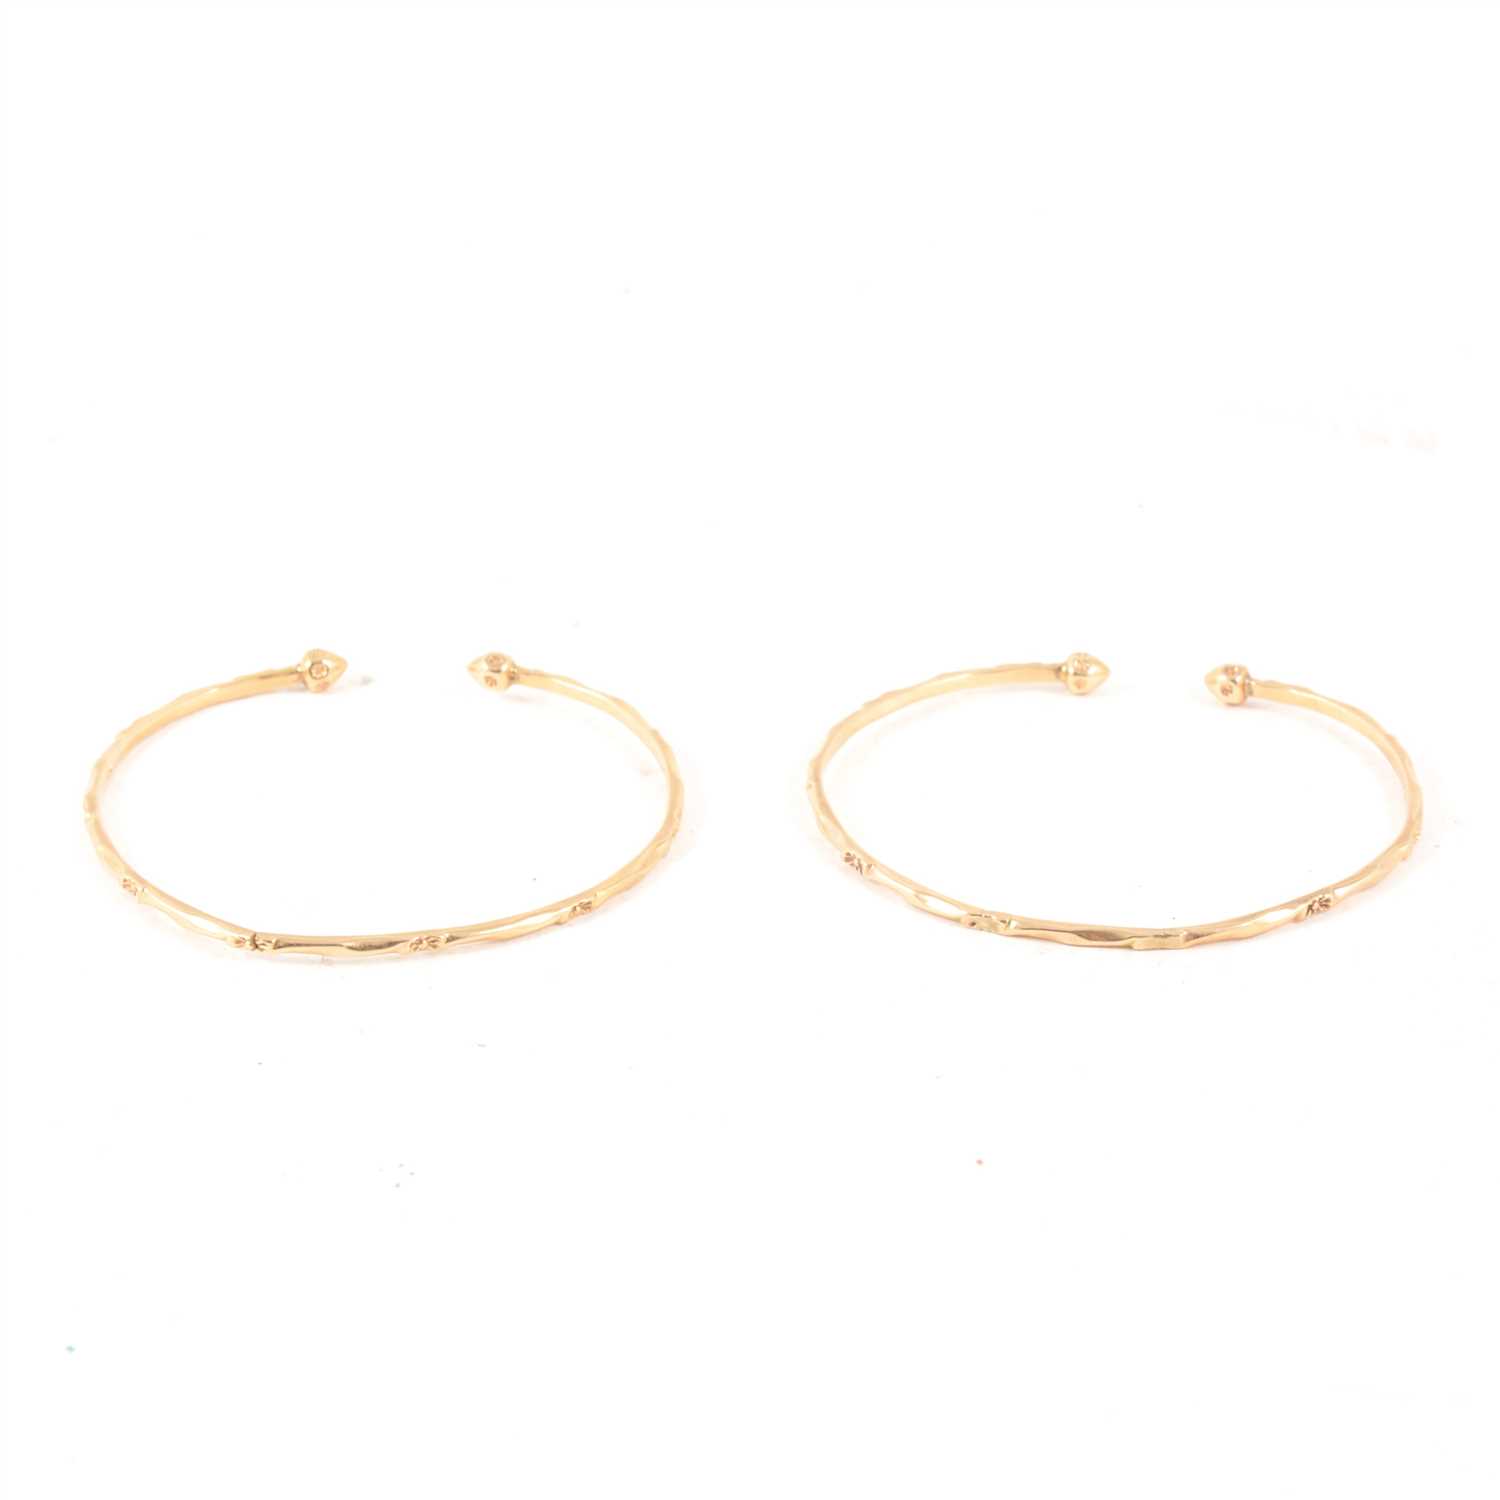 Lot 241 - A pair of yellow metal open ended torque bangles, marked "10K", 2.2mm width, total weight approx. 17.3gms.